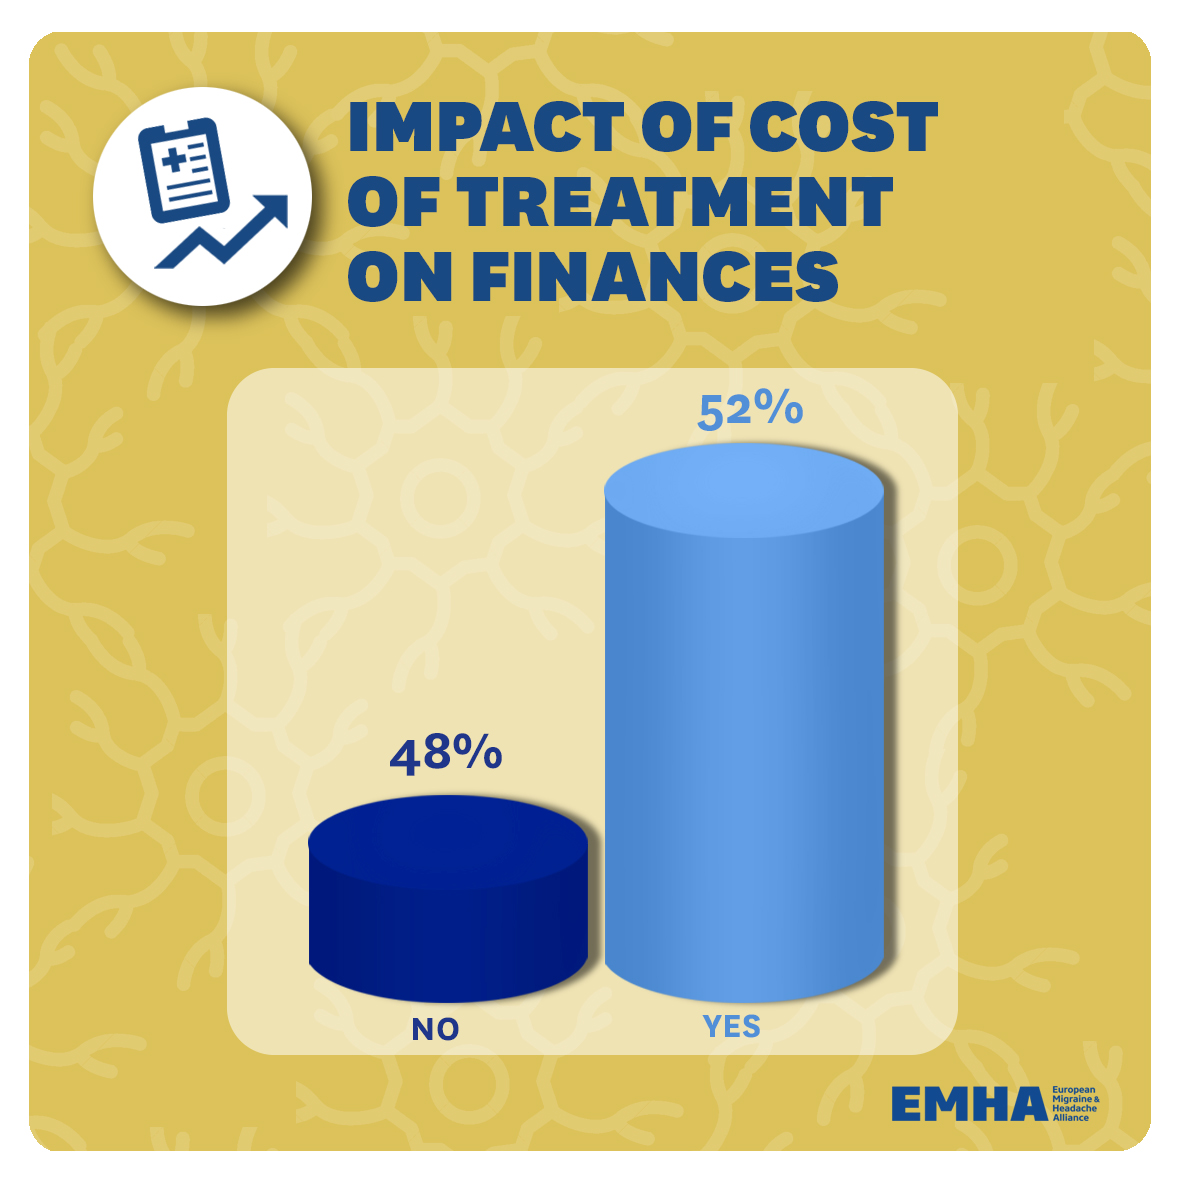 30.-Impact-of-cost-of-treatment